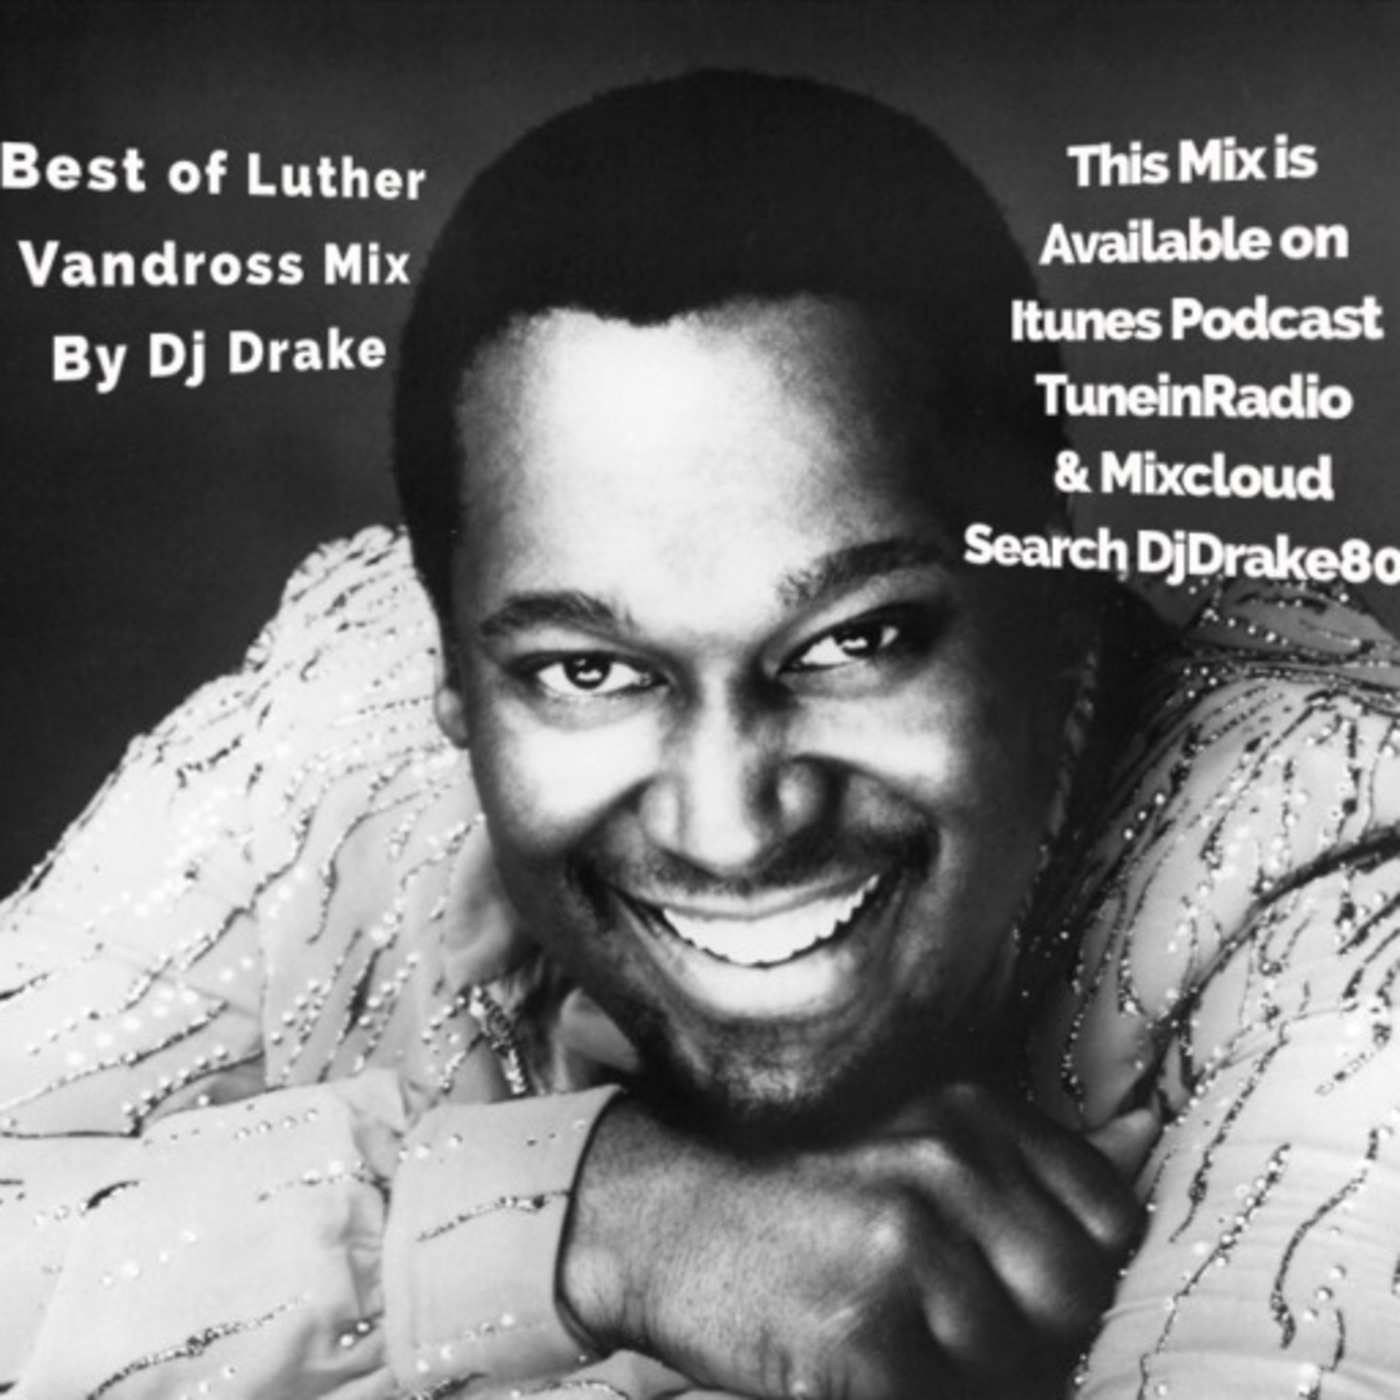 The Best of Luther Vandross